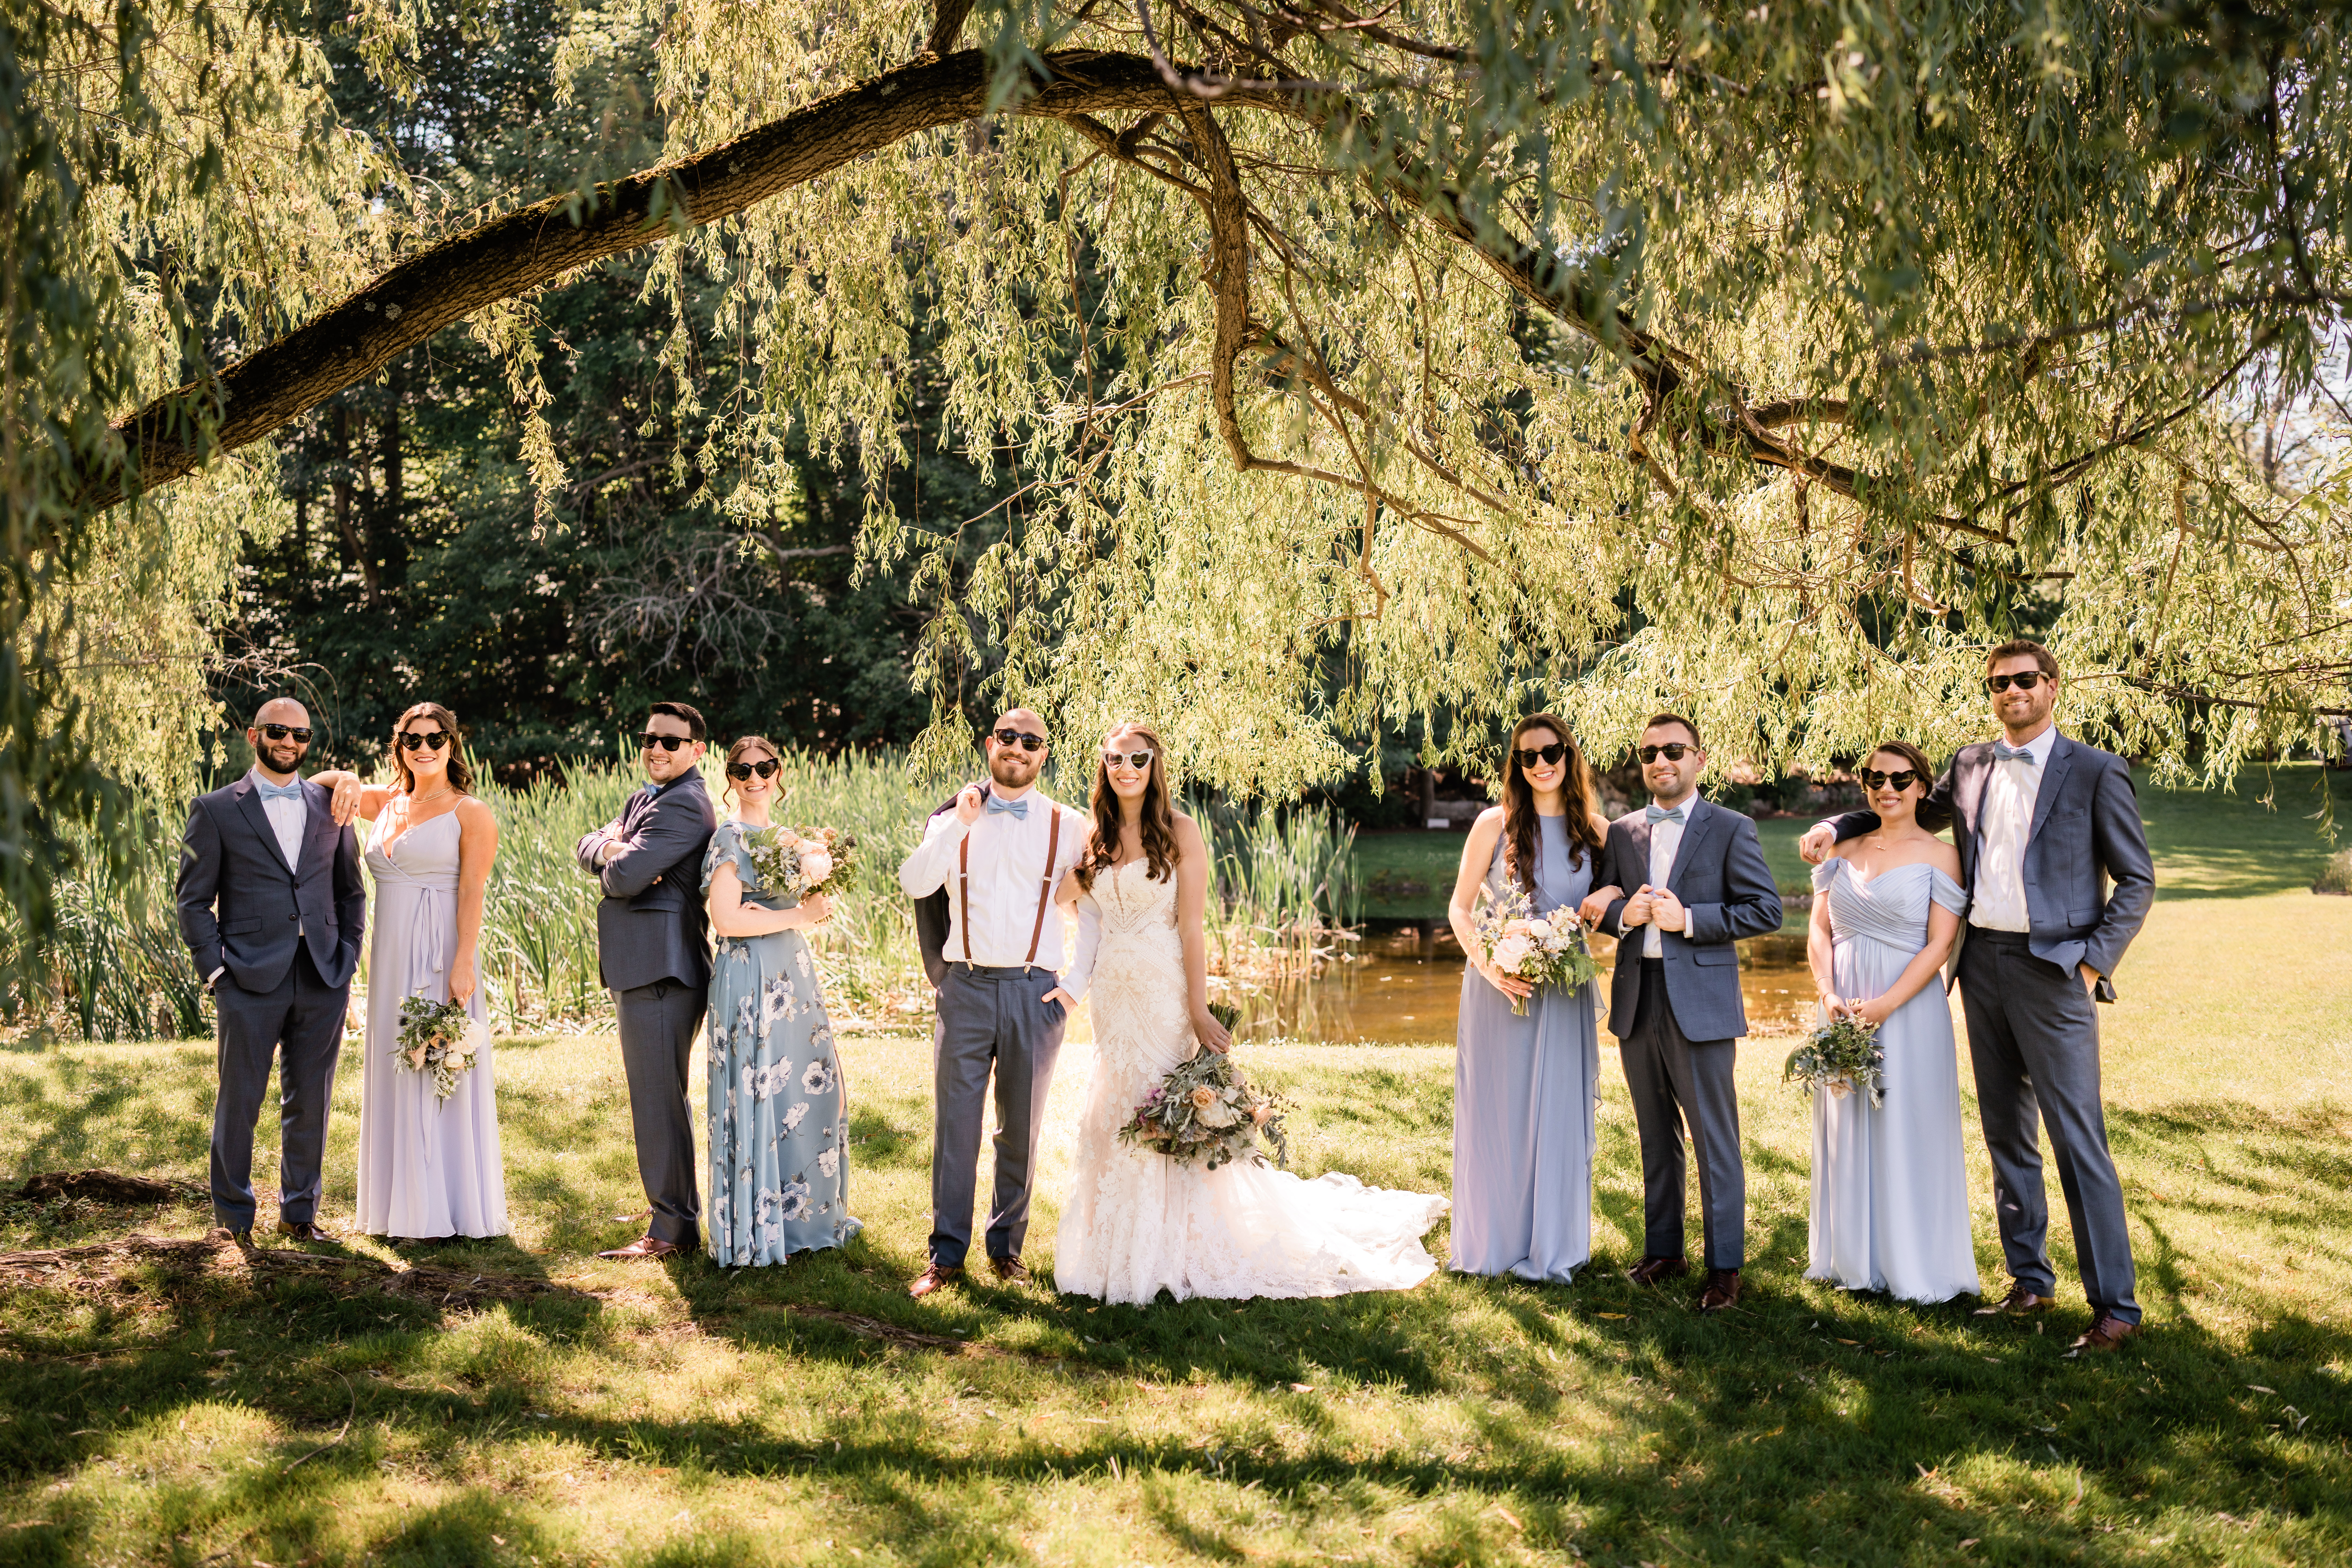 The Barn at Perona Farms, Perona Farms Wedding, New Jersey Wedding Photographer, Sussex County Wedding Photographer, NJ Wedding Photographer, Sussex County NJ Photographer, New Jersey Wedding Venues, Sussex County Wedding Venue, Wedding Inspiration, Wedding Planning, Wedding Ideas, Unique Wedding Photos, Wedding Photo Ideas, Boho Wedding, Farm Wedding, wedding party posed and smiling with sunglasses on under a willow tree at Perona Farms